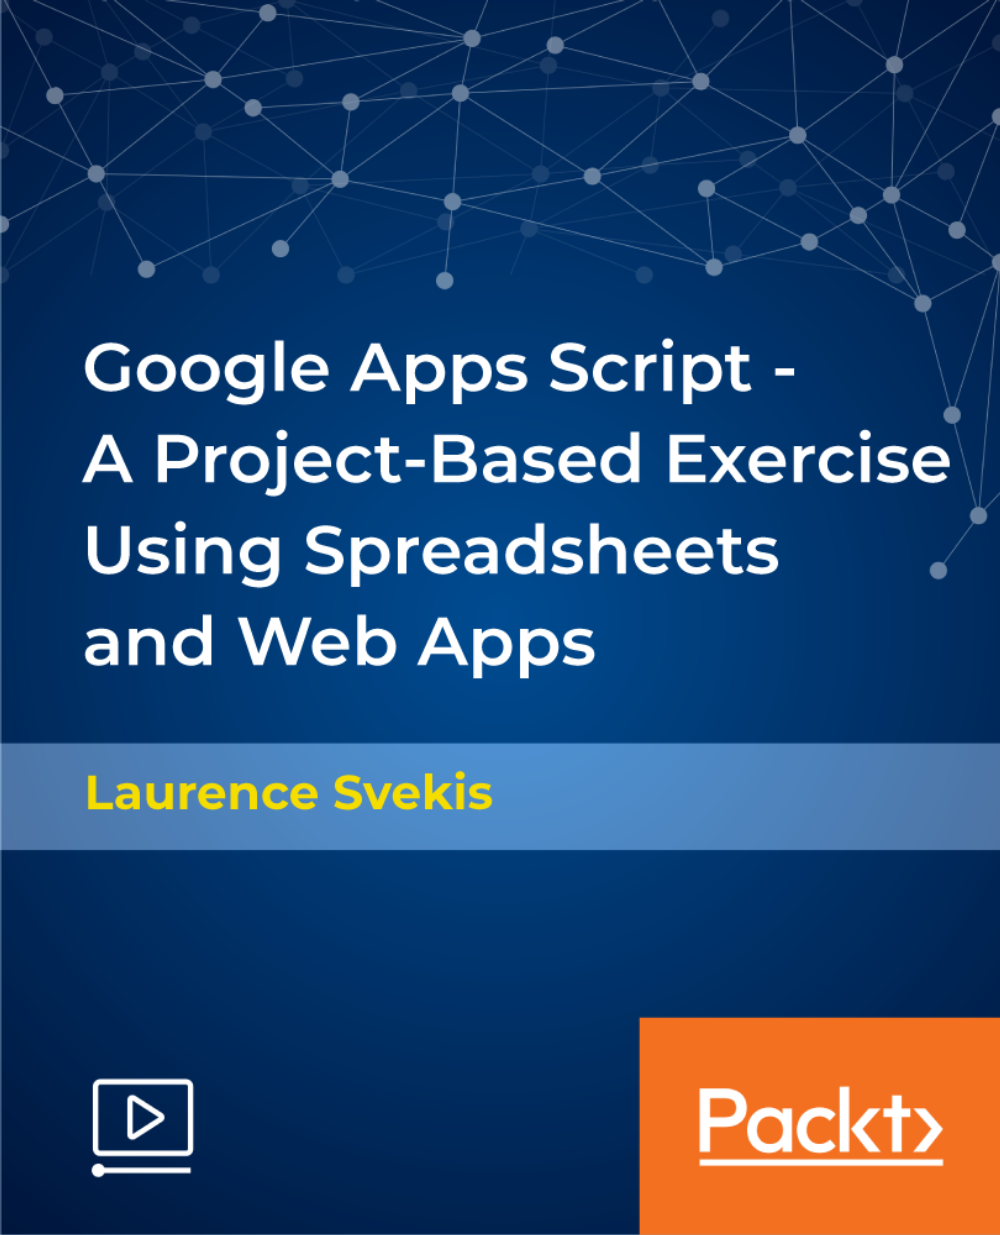 Google Apps Script - A Project-Based Exercise Using Spreadsheets and Web Apps